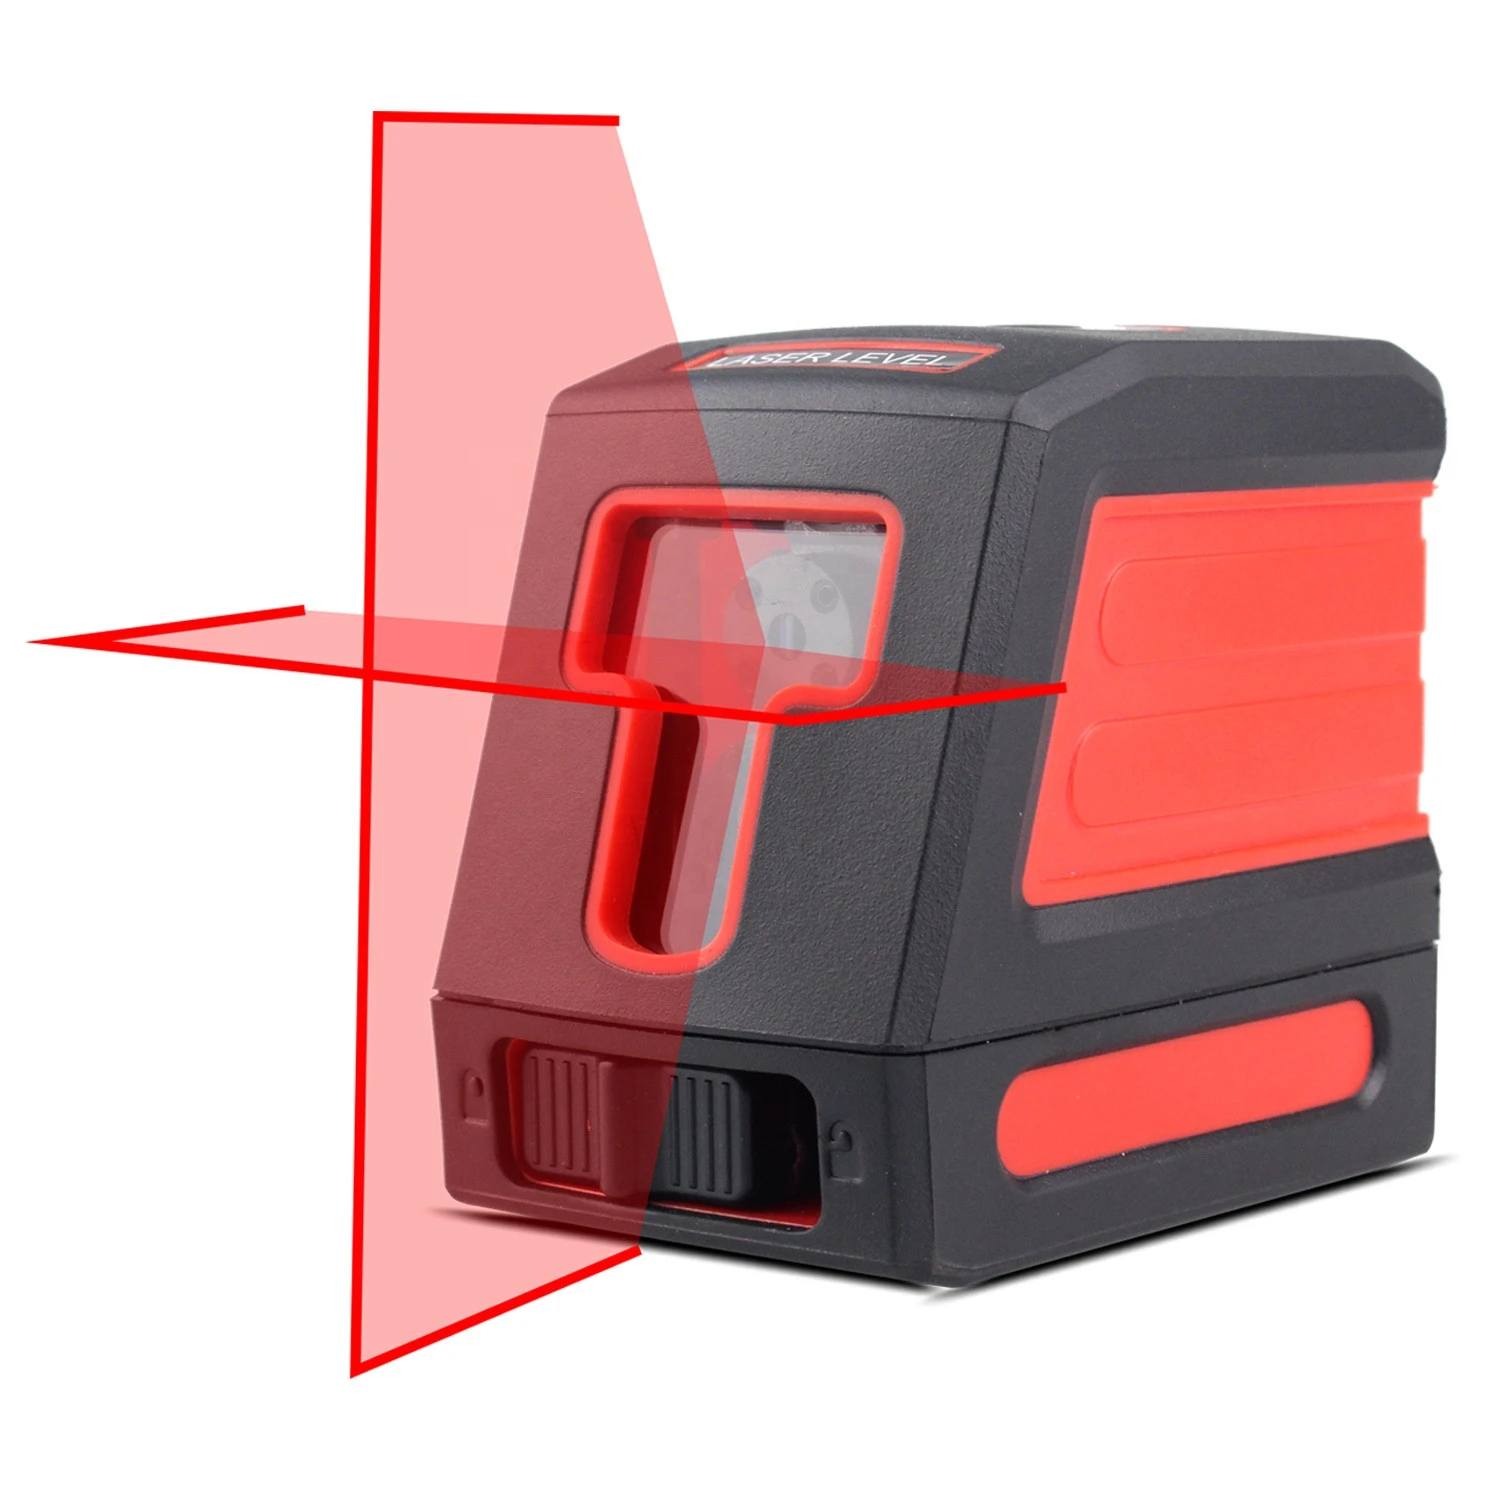 Red Line Laser Level Cross Line Laser Switchable Self-Leveling Vertical and Horizontal Line Dual Laser Sources Decoration tools